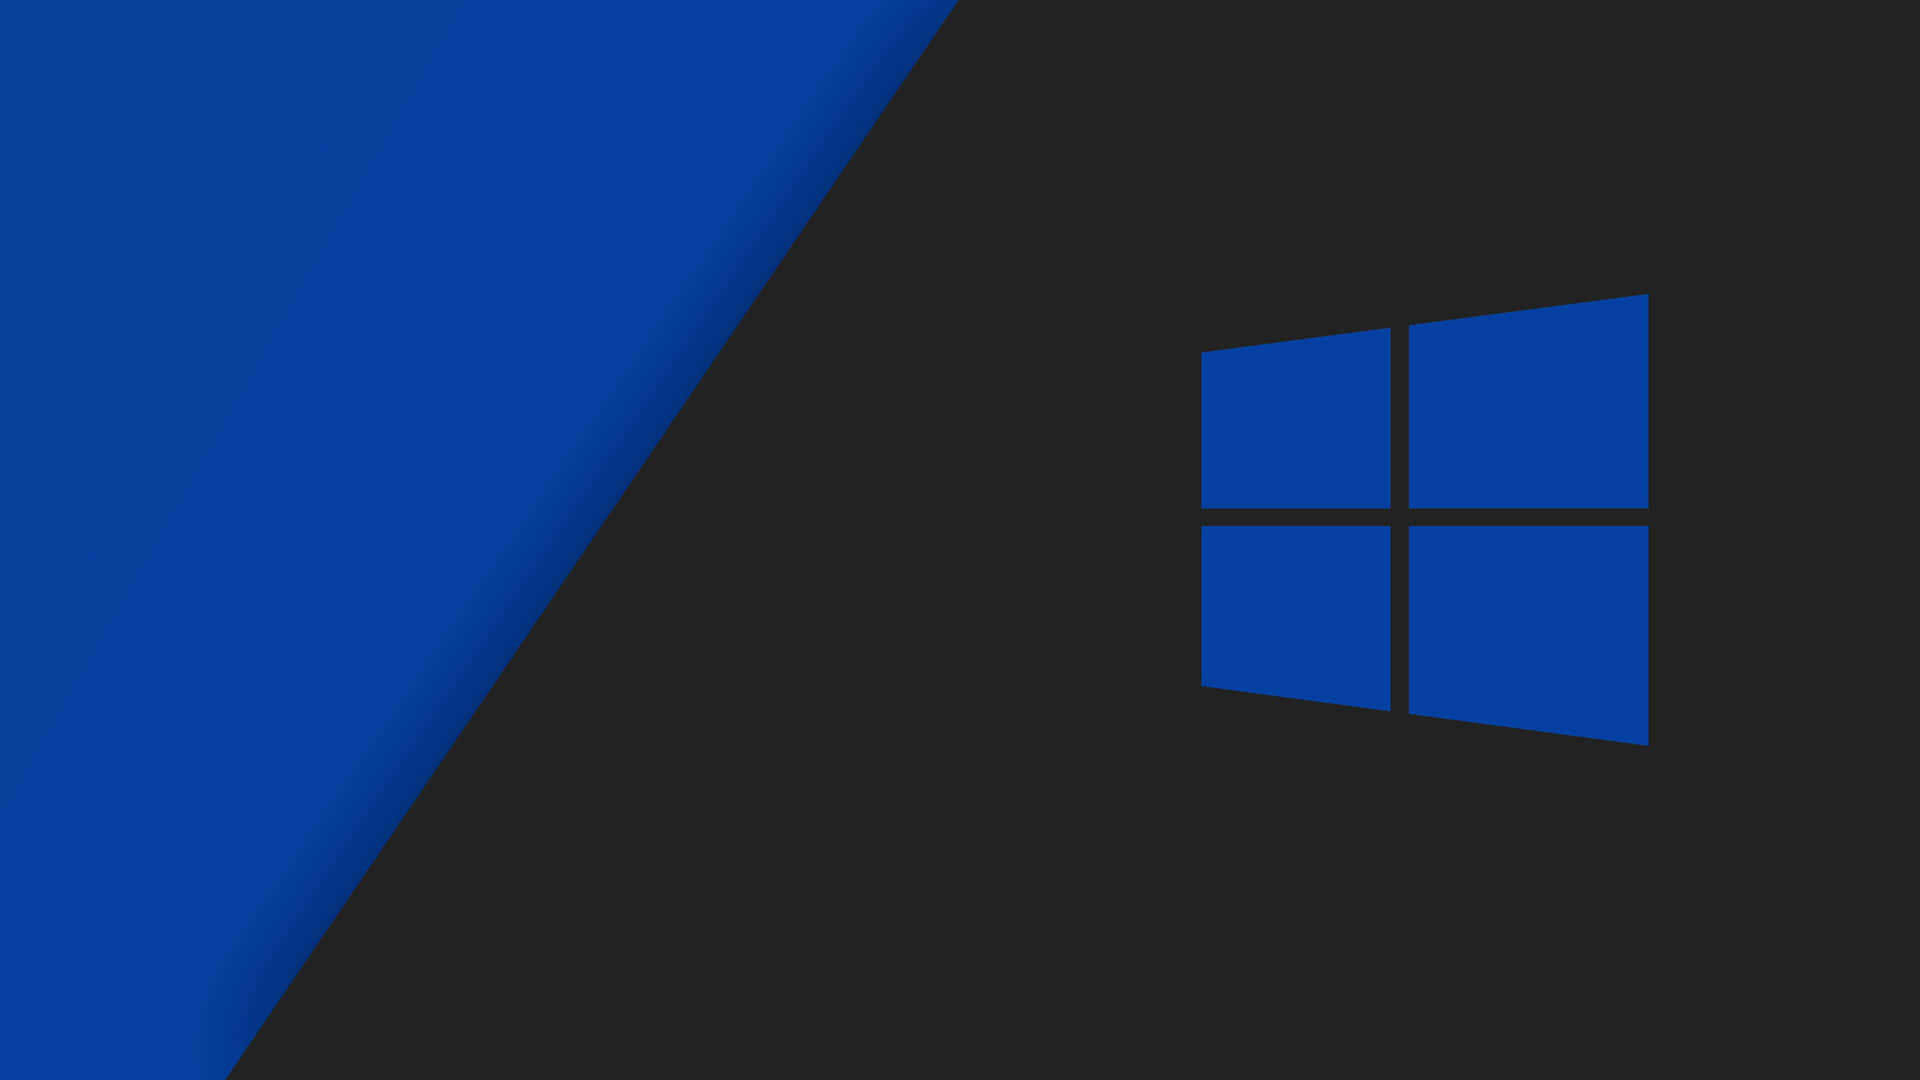 Windows 10 Logo With Blue And Black Background Wallpaper